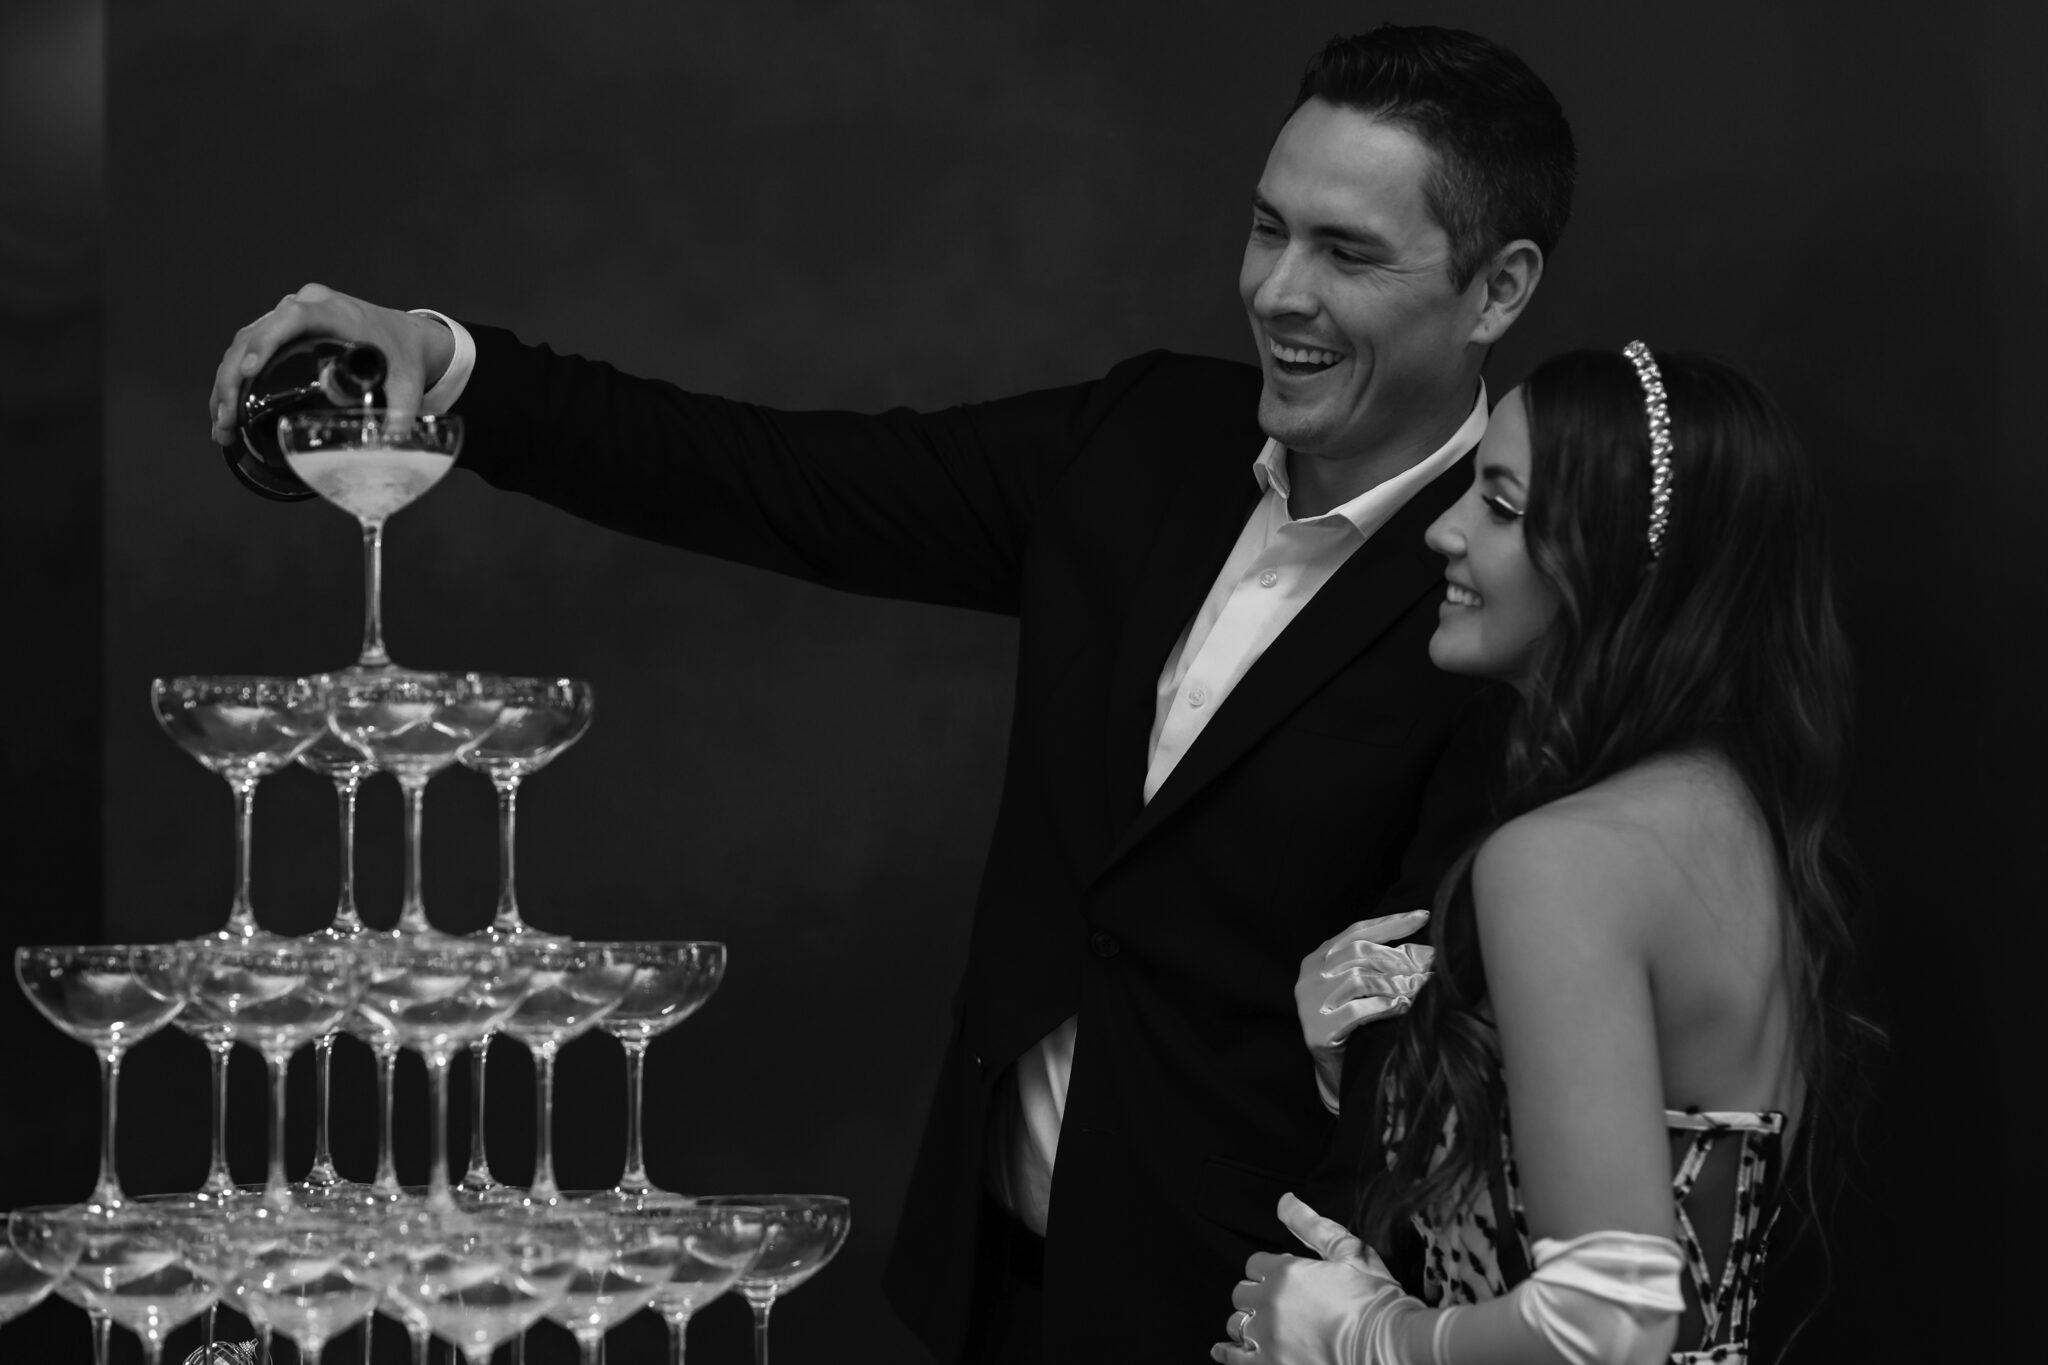 Bride and groom pouring champagne tower at retro-inspired wedding at The Brownstone in Calgary, Alberta.